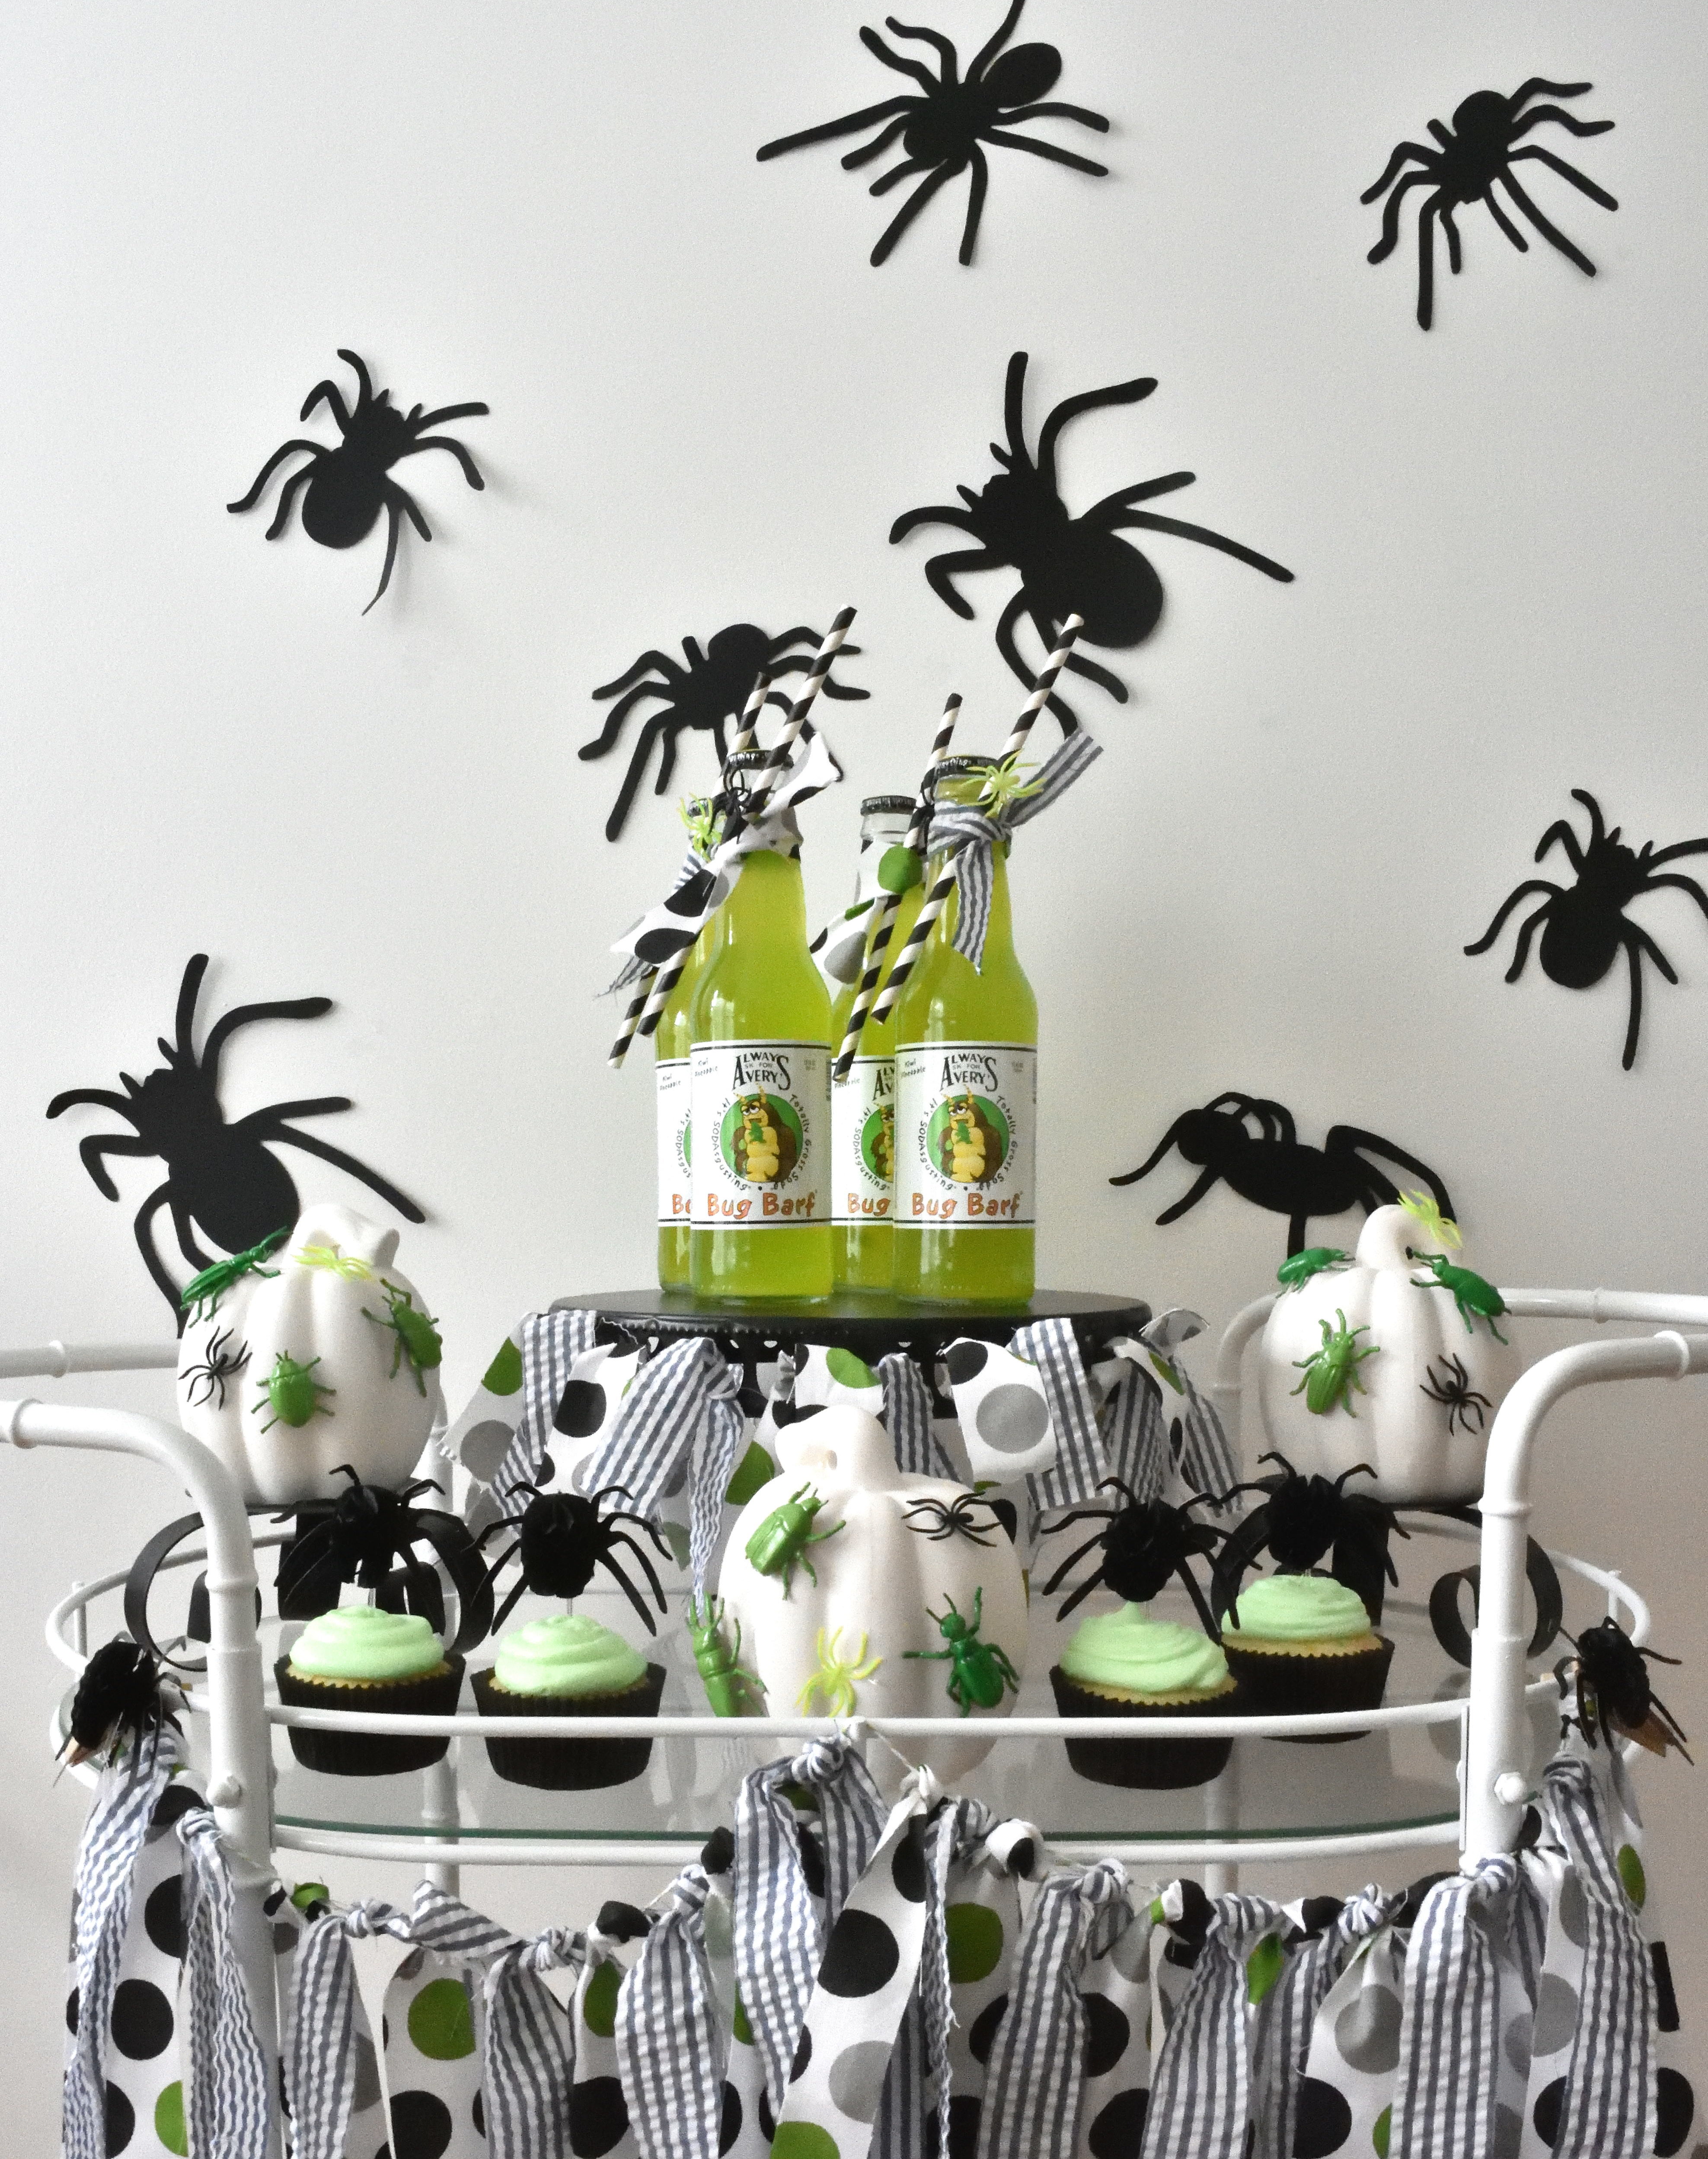 Halloween treat cart decorated in a bug theme